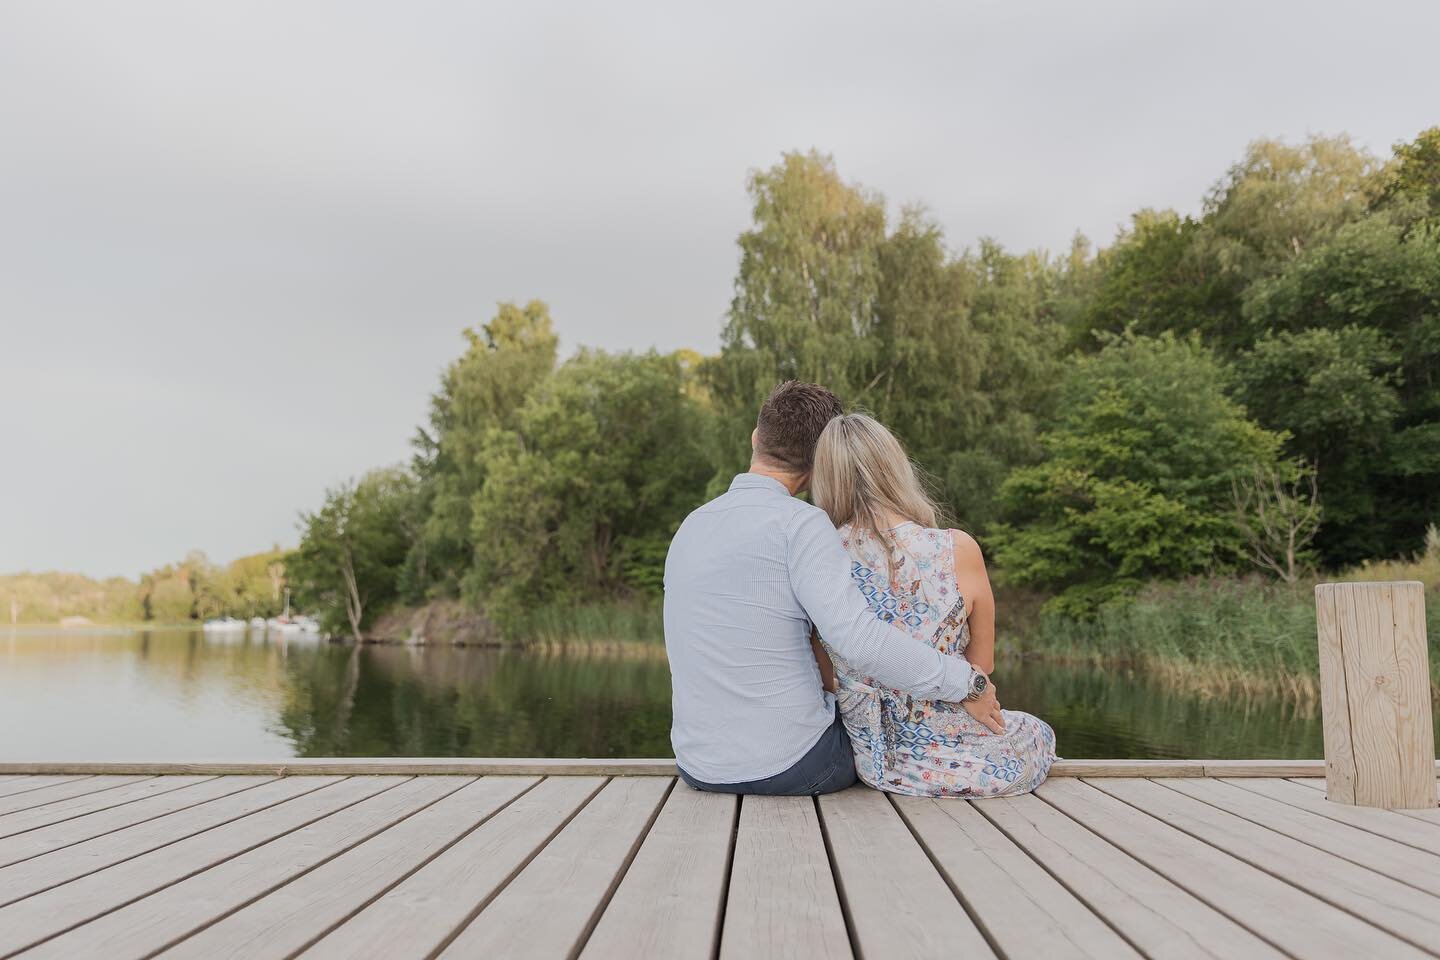 A late summer evening surrounded by the water and nature that we love. Where would your perfect Pre-wedding shoot take place? 

&bull;
&bull;
&bull;
&bull;
&bull;
&bull;
&bull;
&bull;
&bull;
&bull;
* 
* &bull;
* 
* 
* #weddingphotography #wedding2022